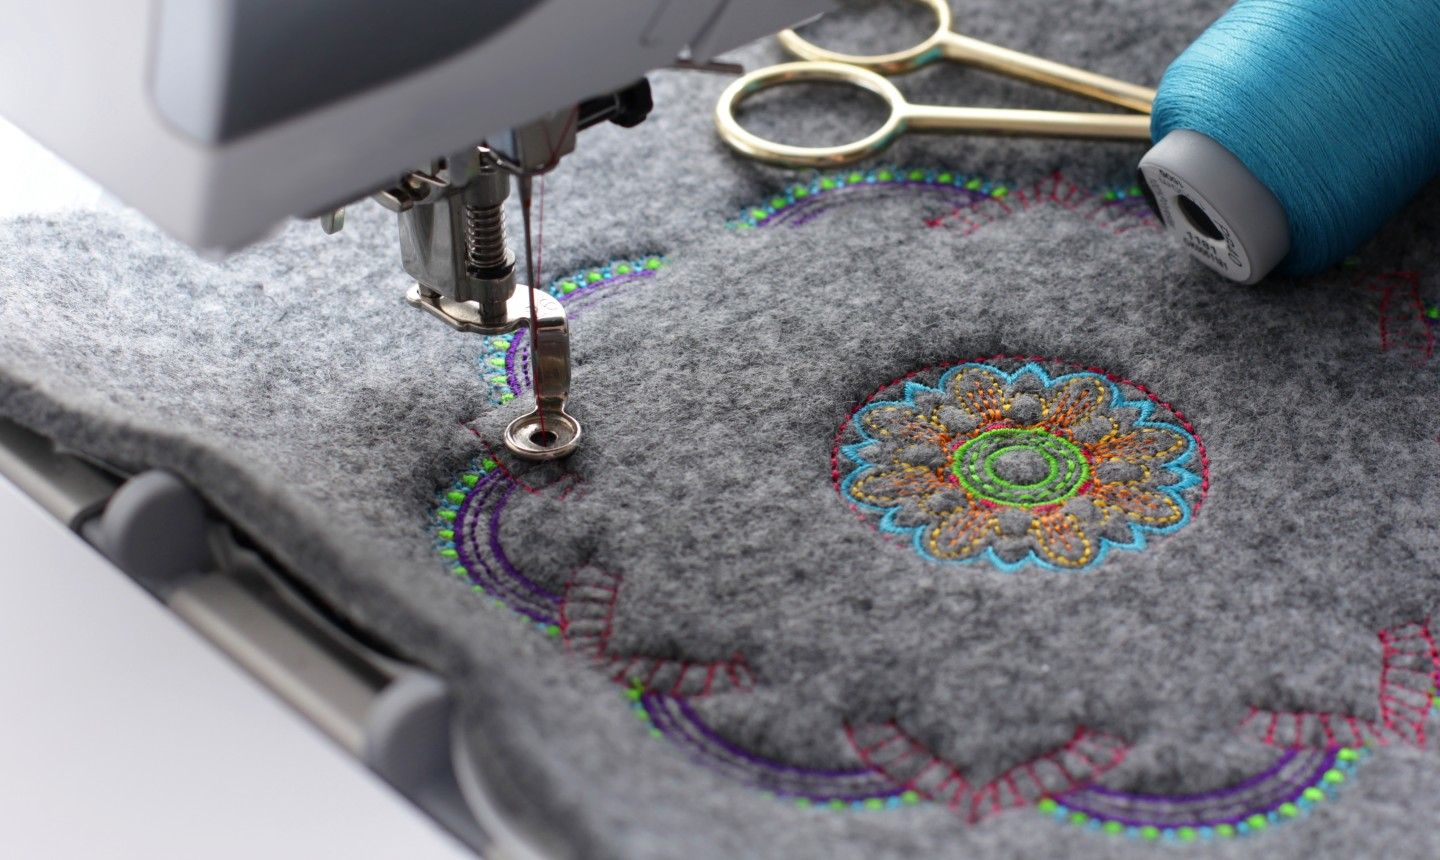 Free Machine Embroidery Patterns Brother Our 7 Top Tips For Machine Embroidery Newbies